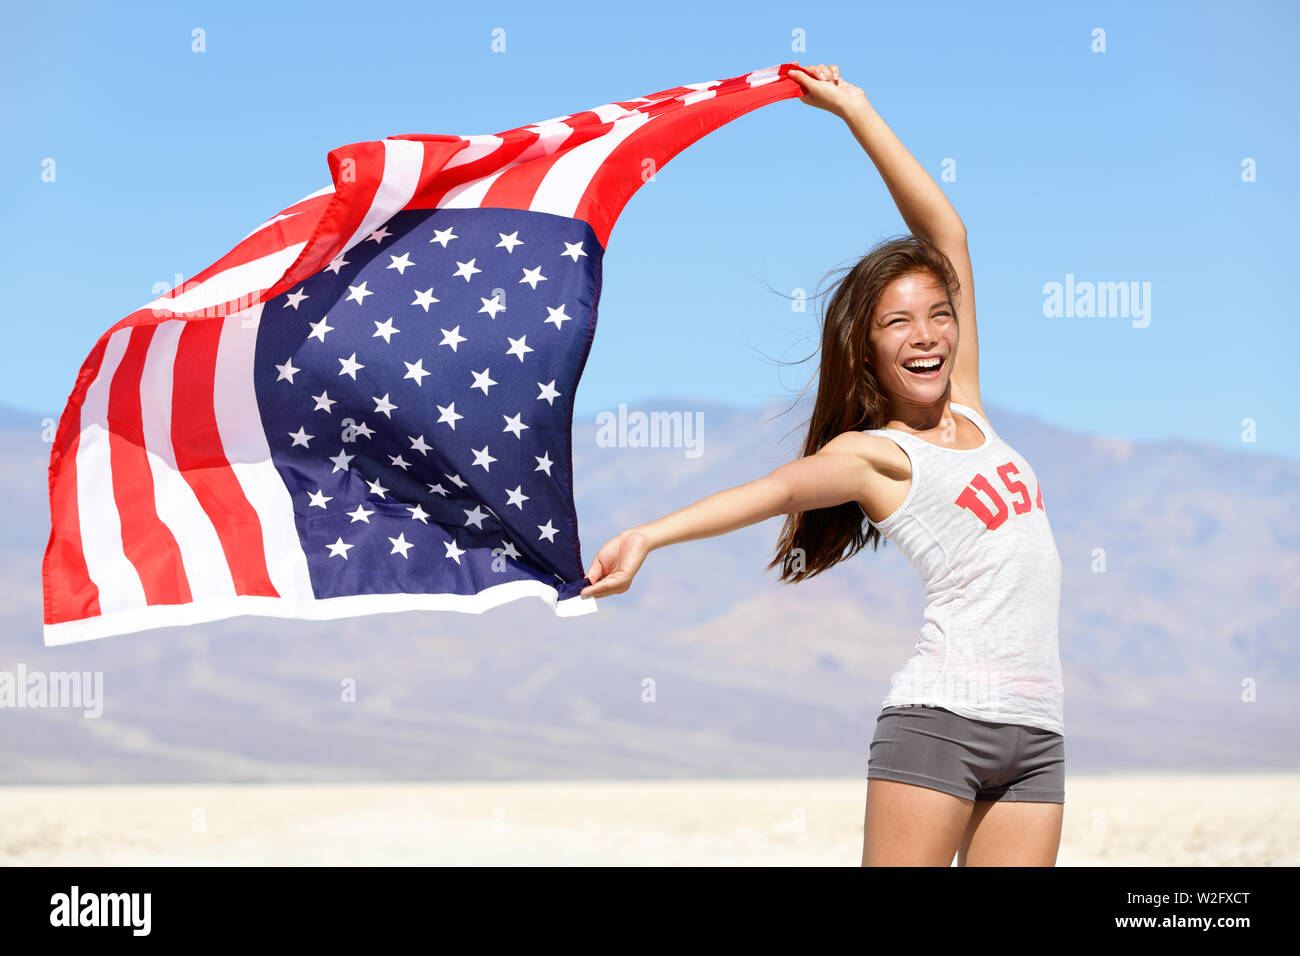 American flag - woman USA sport athlete winner cheering waving stars and stripes outdoor after in desert nature. Beautiful cheering happy young multicultural girl joyful and excited. Stock Photo